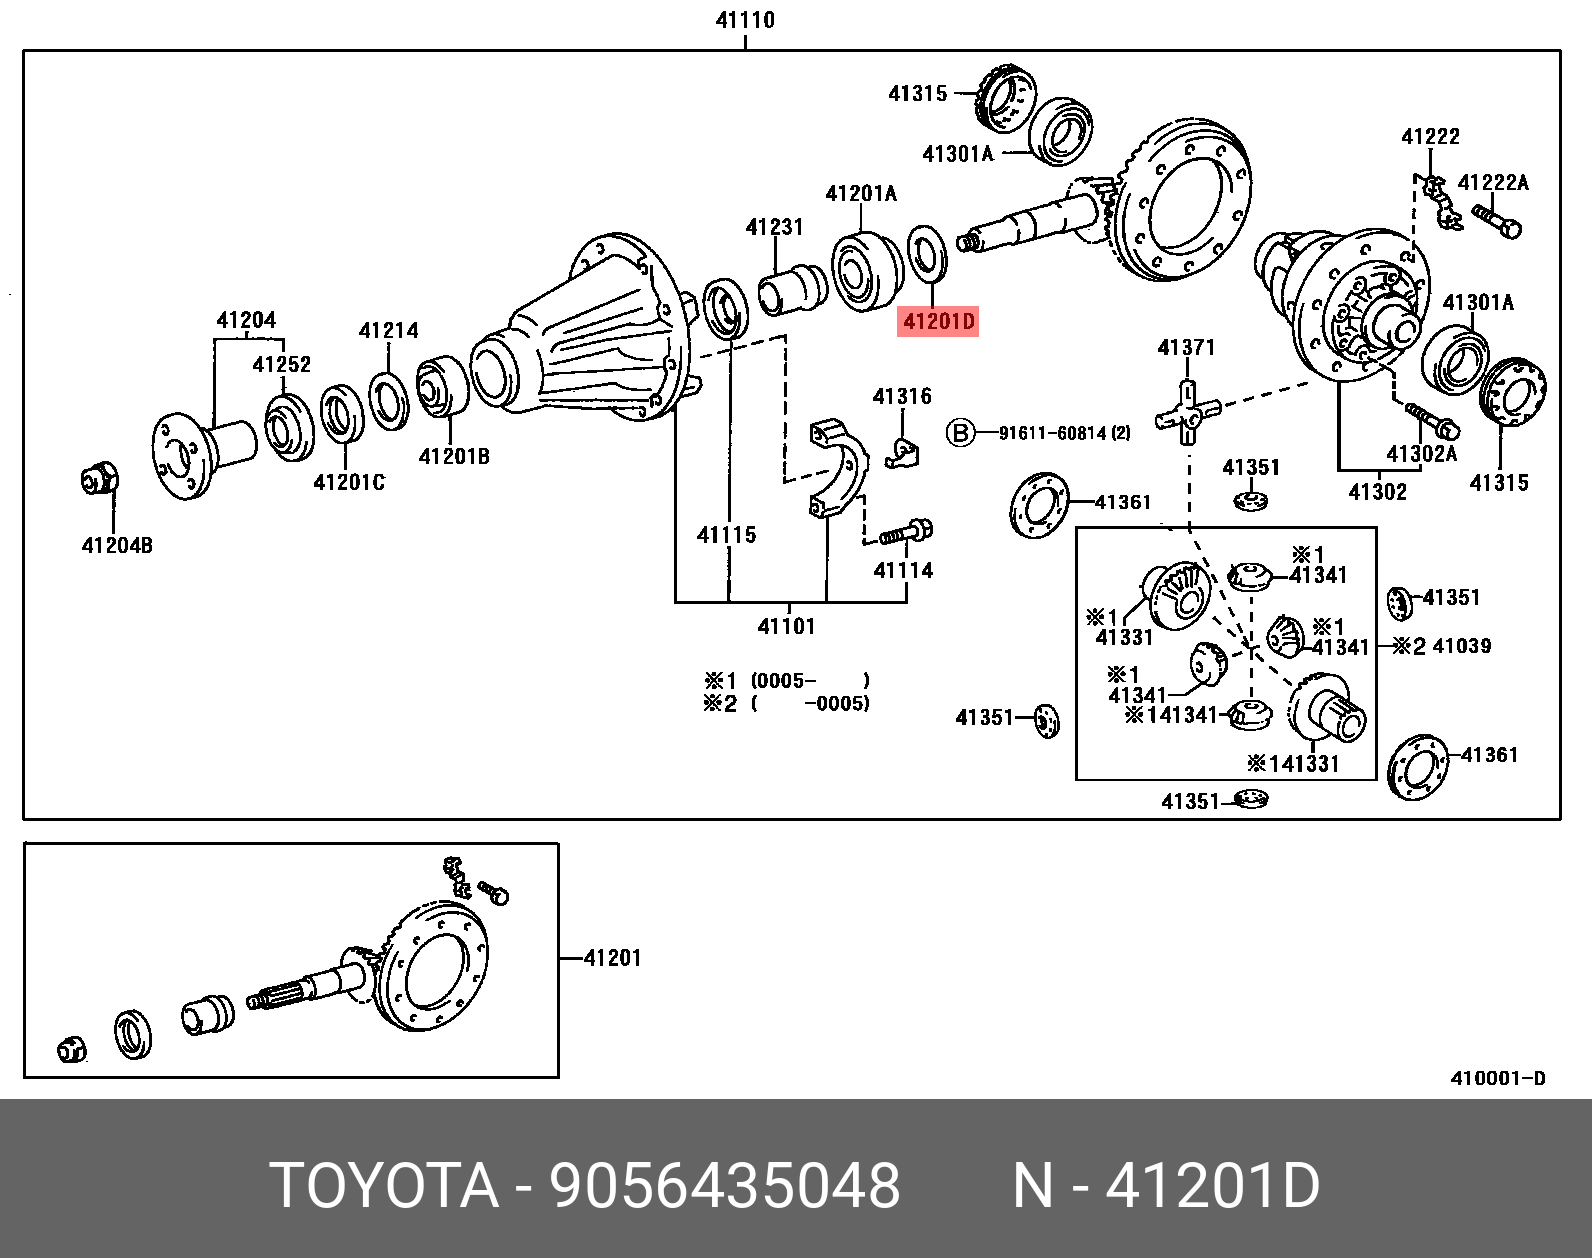 COROLLA AXIO/ FIELDER 200609 - 201204, WASHER, PLATE (FOR REAR DIFFERENTIAL DRIVE PINION)